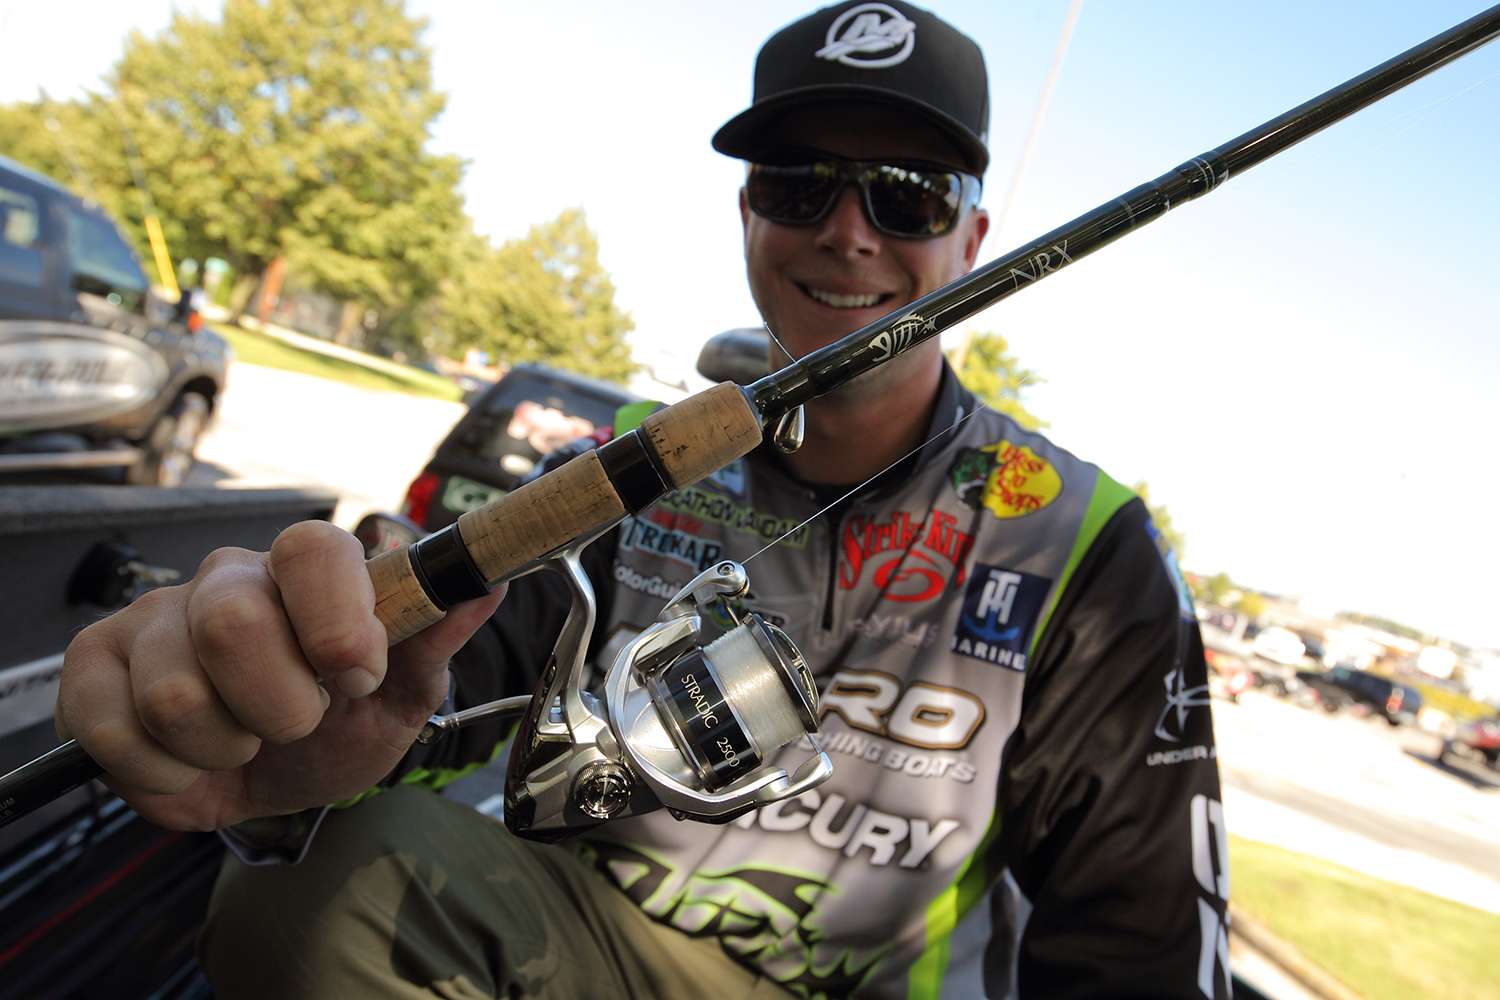 The G.Loomis NRX 822 drop shot rod with the new Shimano Stradic 2500 reel is one JVD's favorite combinations.